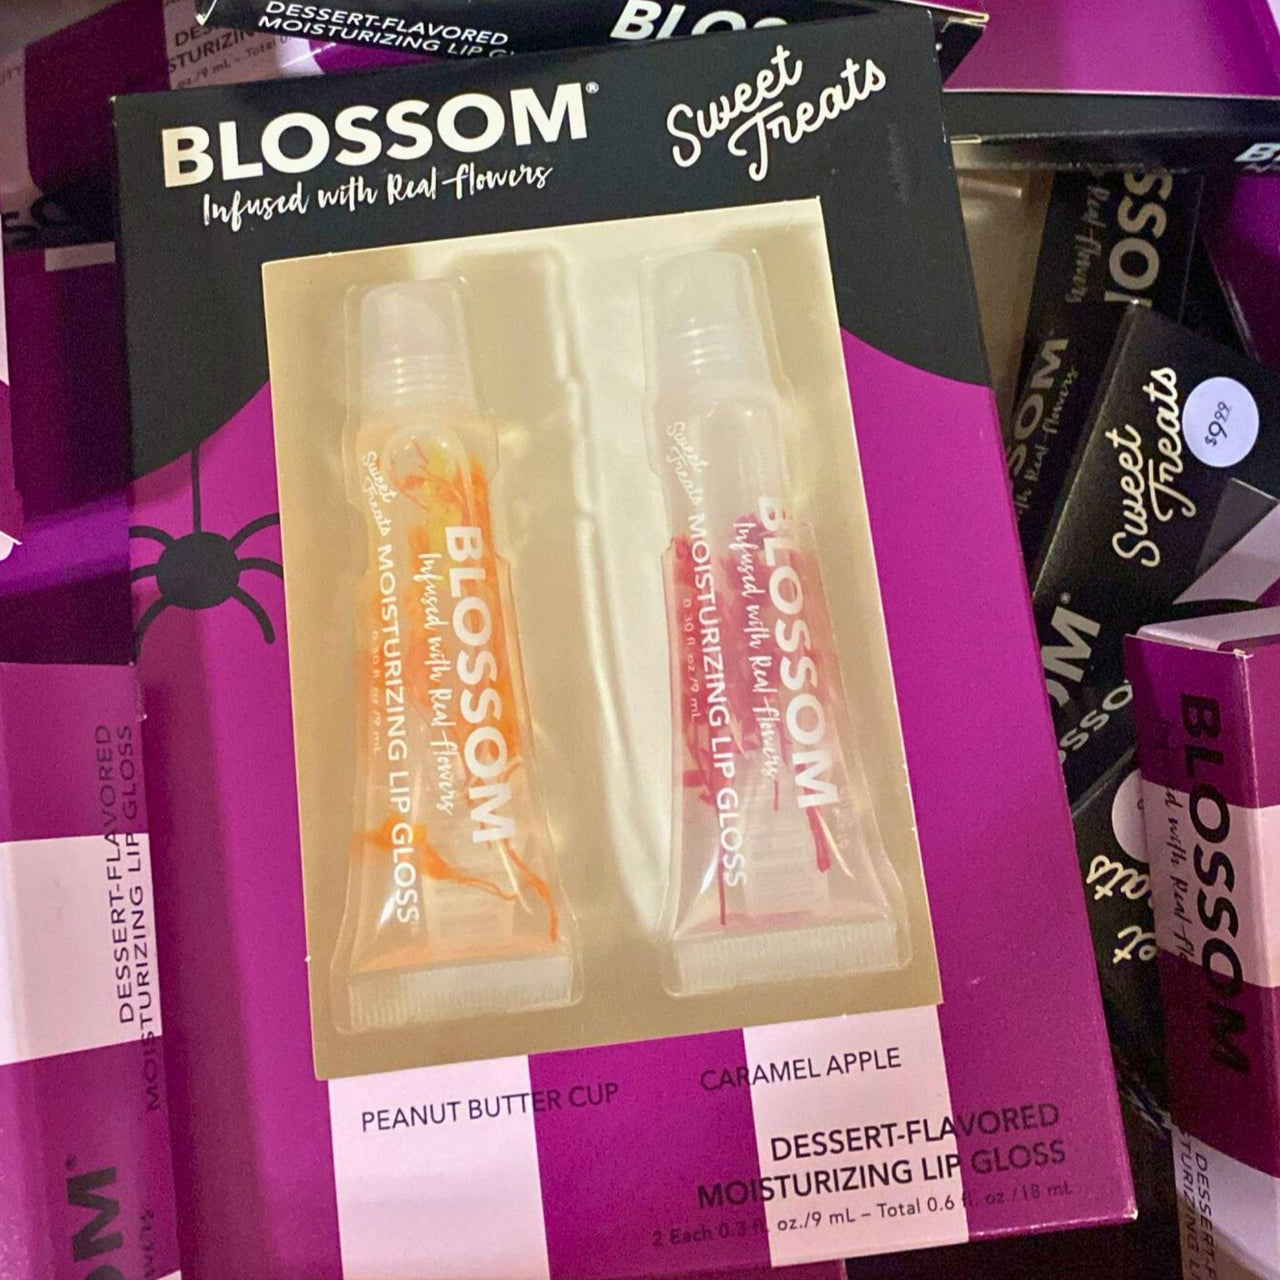 Blossom Infused with Real Flowers Sweet Treats Dessert-Flavored Moisturizing Lip Gloss (50 Pcs Lot) - Discount Wholesalers Inc